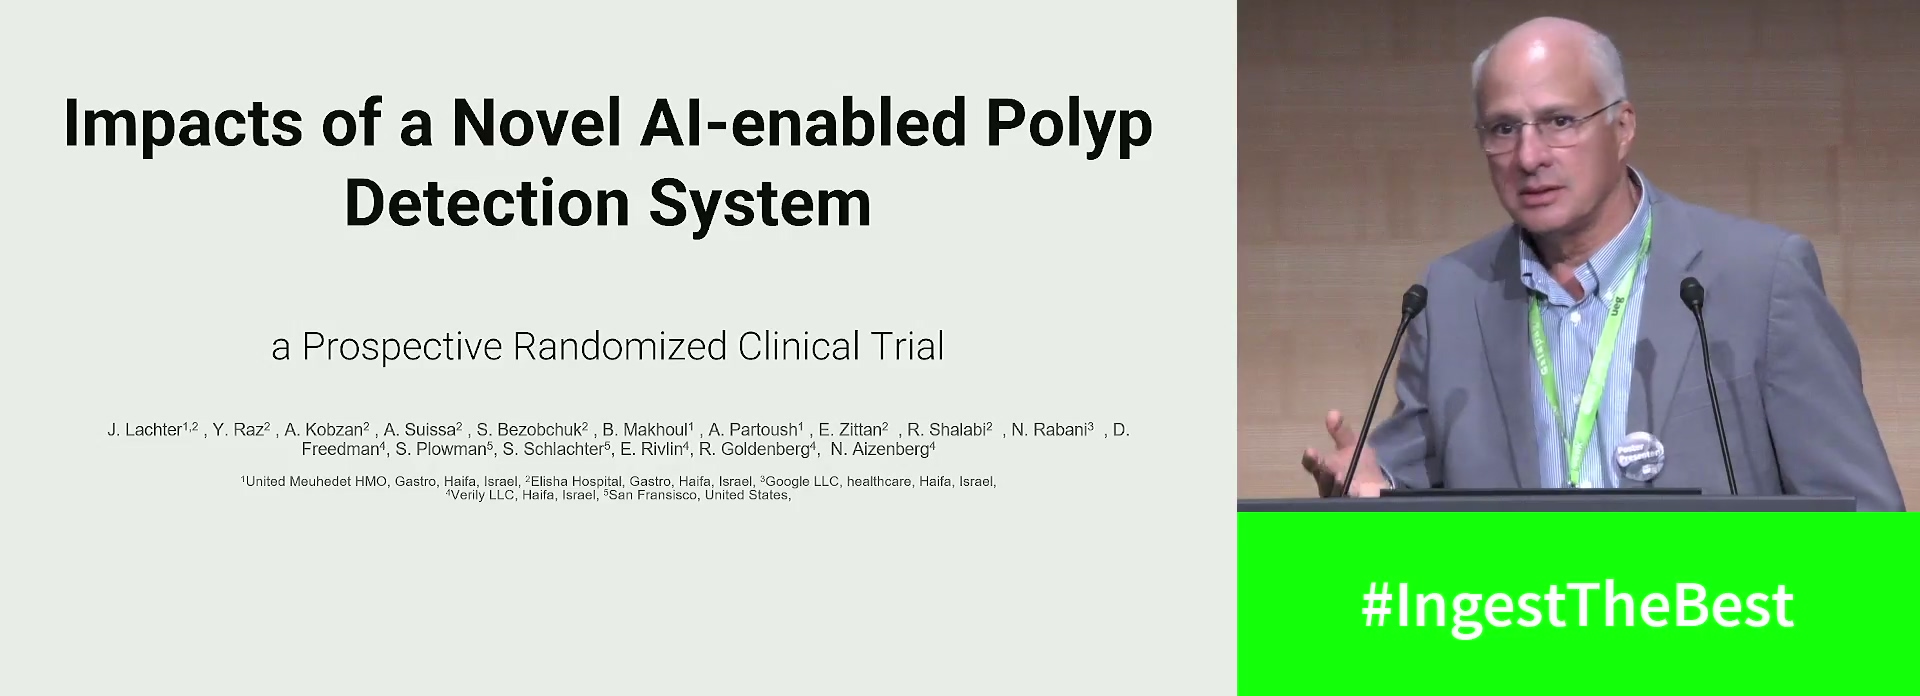 IMPACTS OF A NOVEL AI-ENABLED POLYP DETECTION SYSTEM: A PROSPECTIVE RANDOMIZED CLINICAL TRIAL